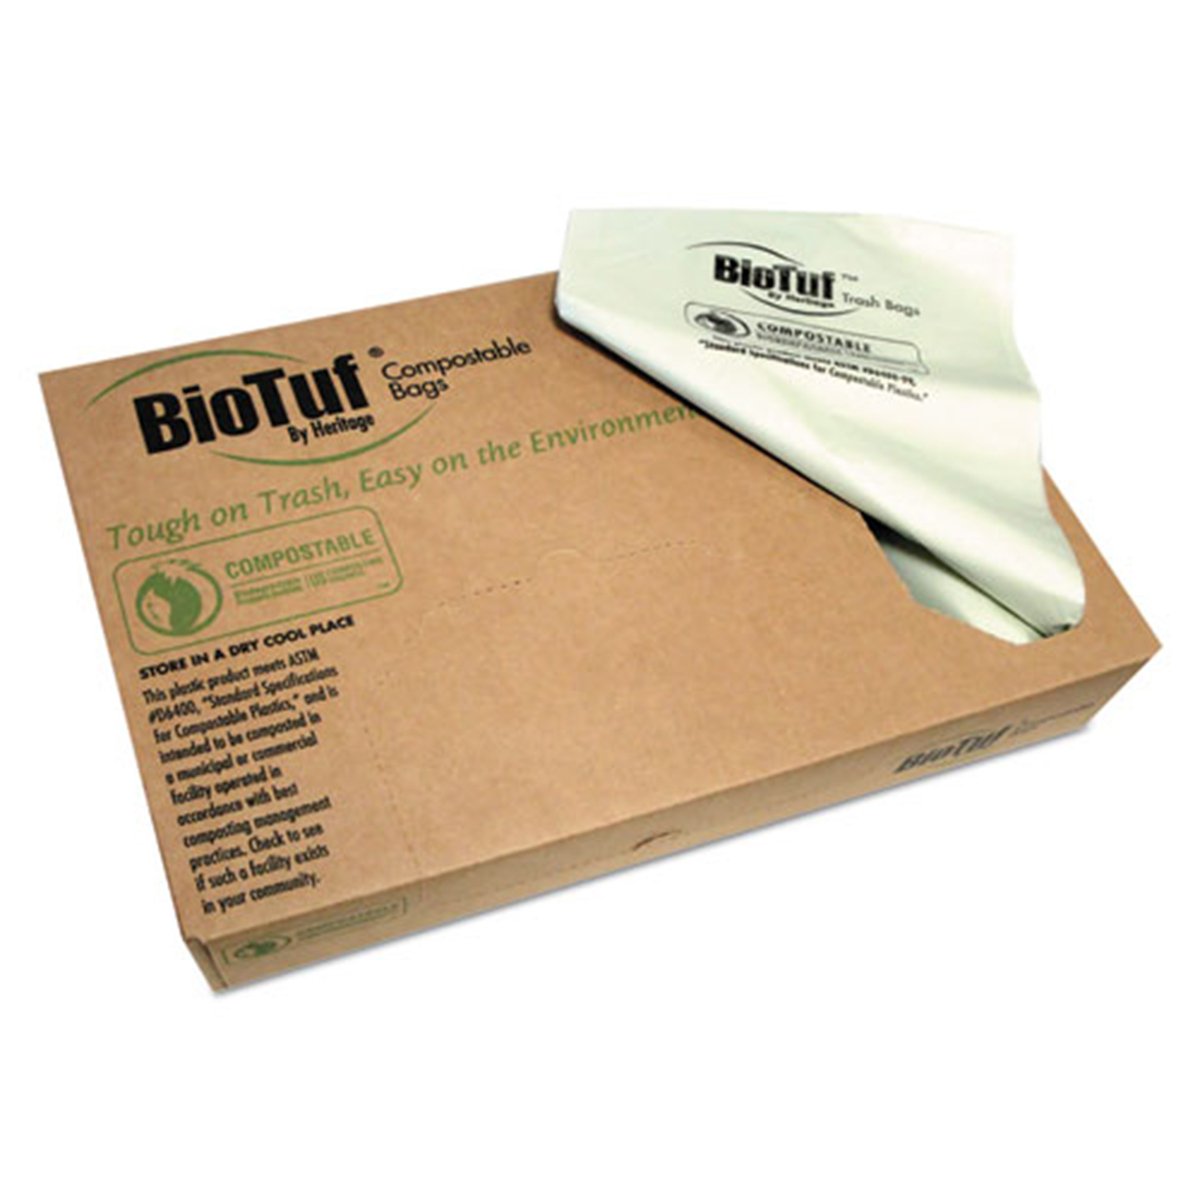 Heritage Biotuf Compostable Can Liners, 45 Gal, 0.9 Mil, 40″ x 46″, Green, 100/ctn